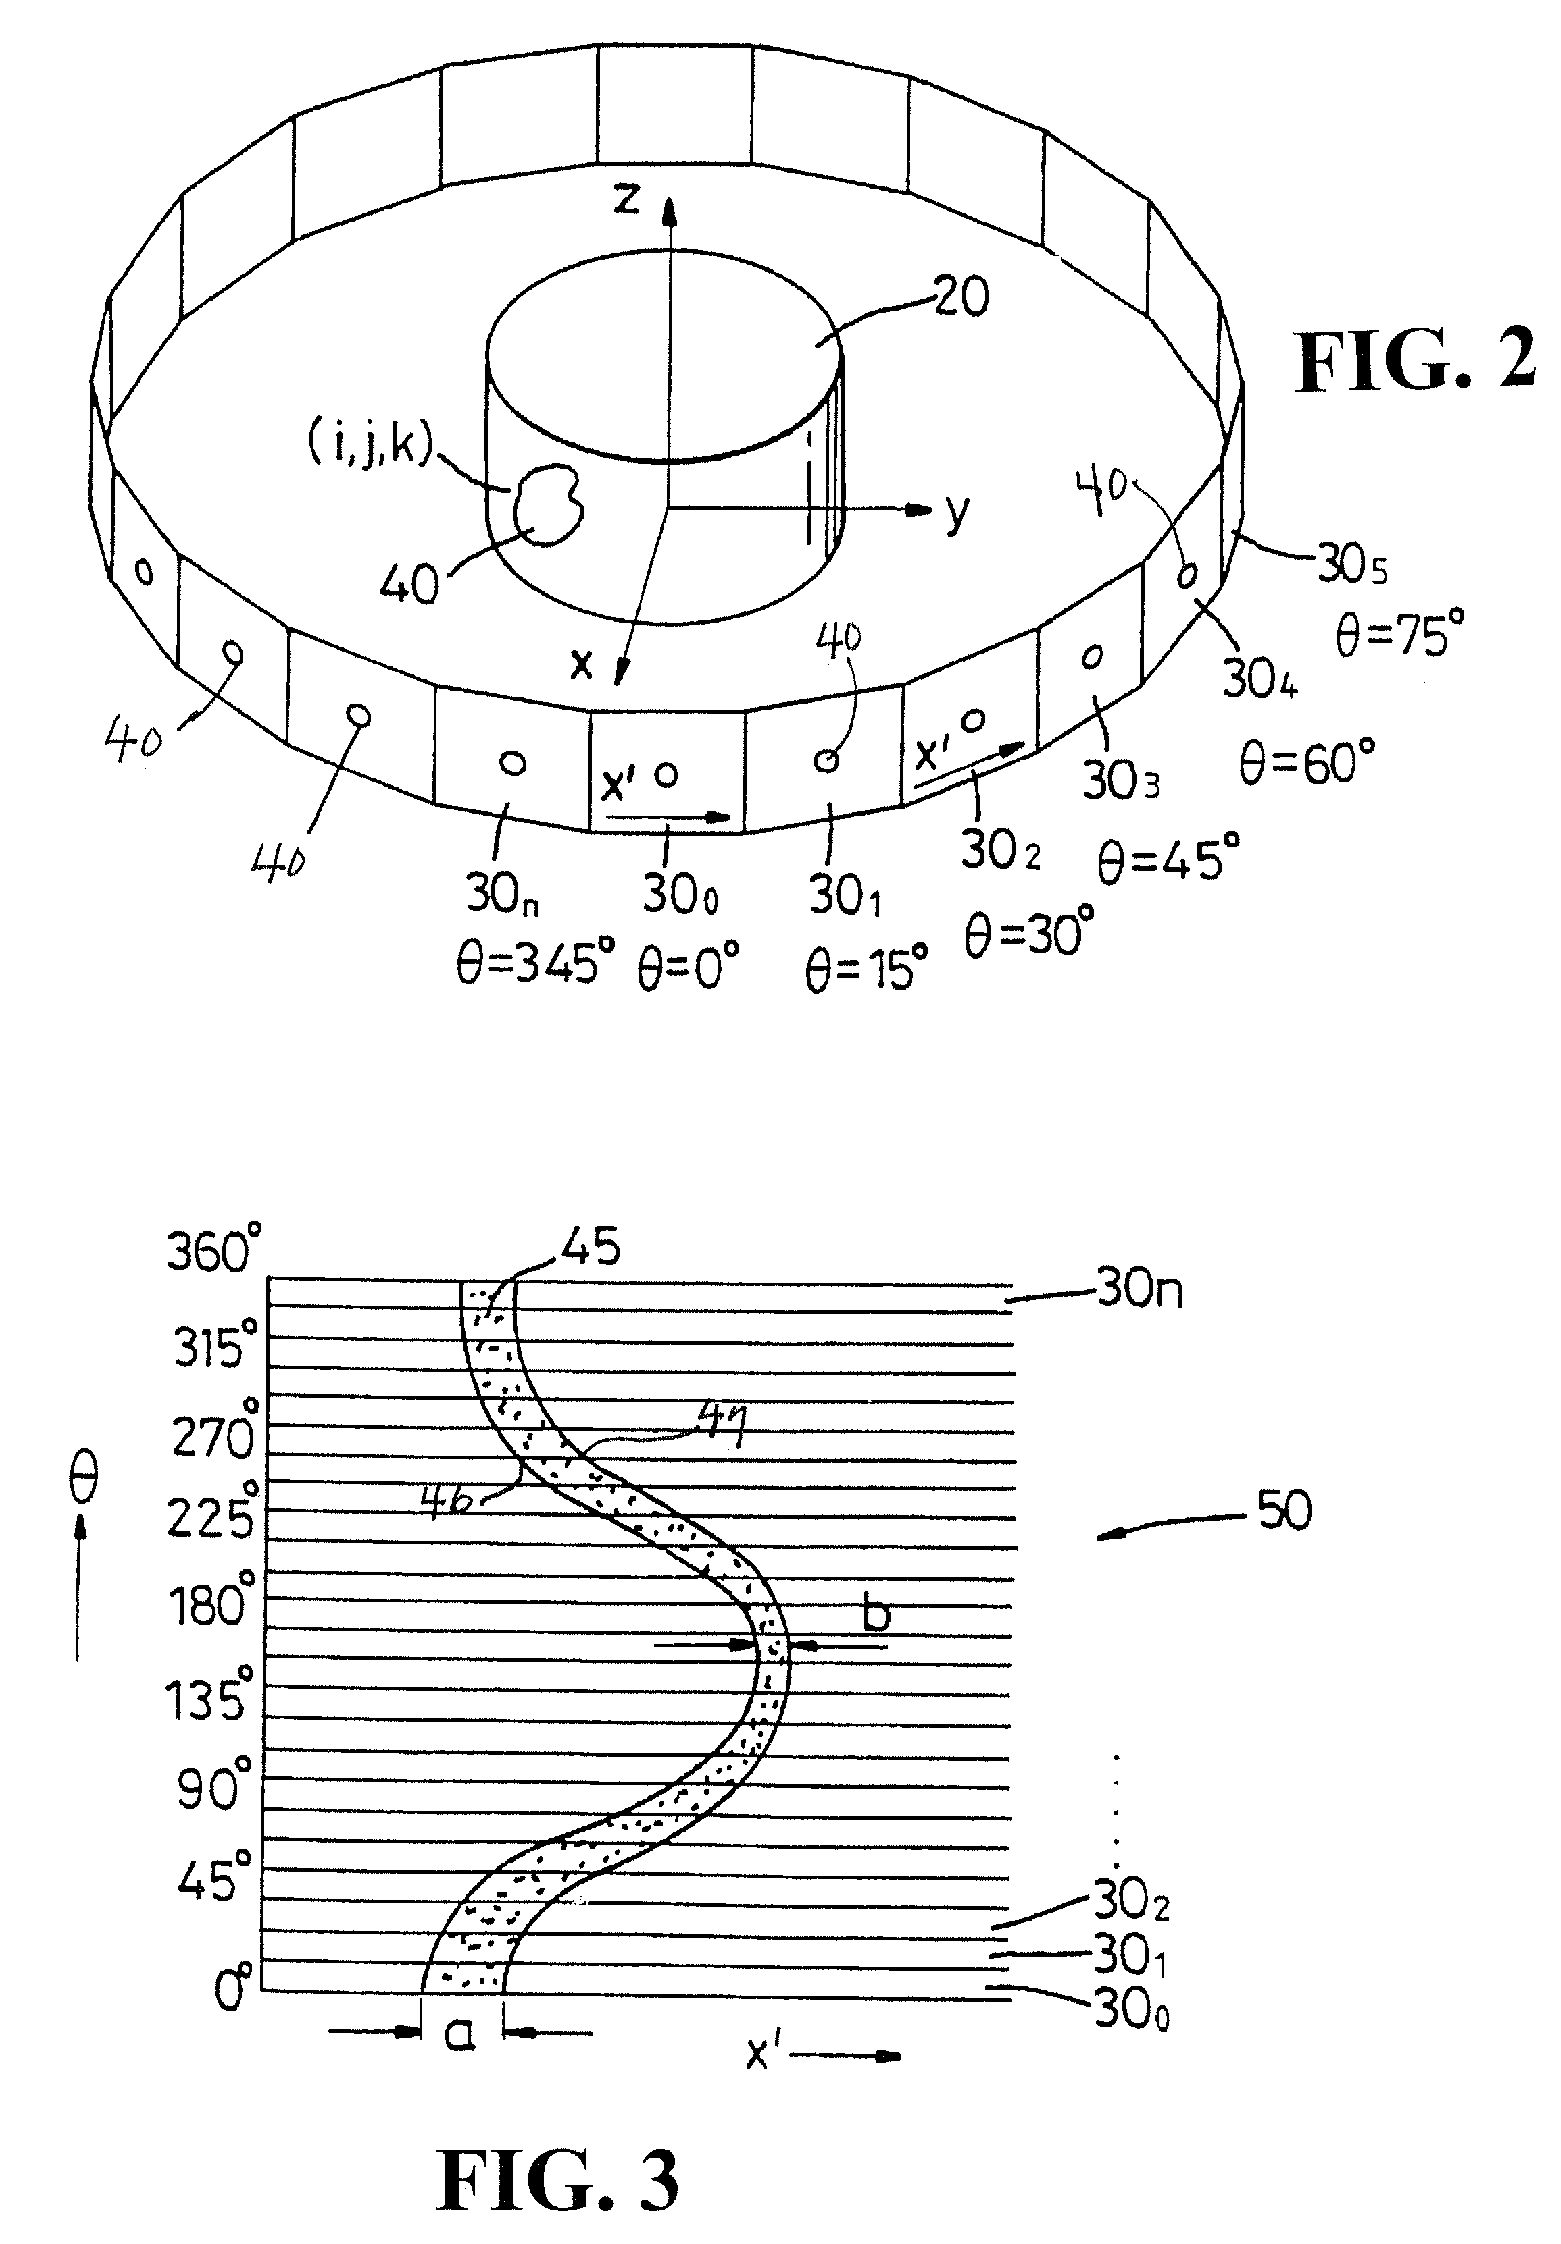 Object identifying system for segmenting unreconstructed data in image tomography